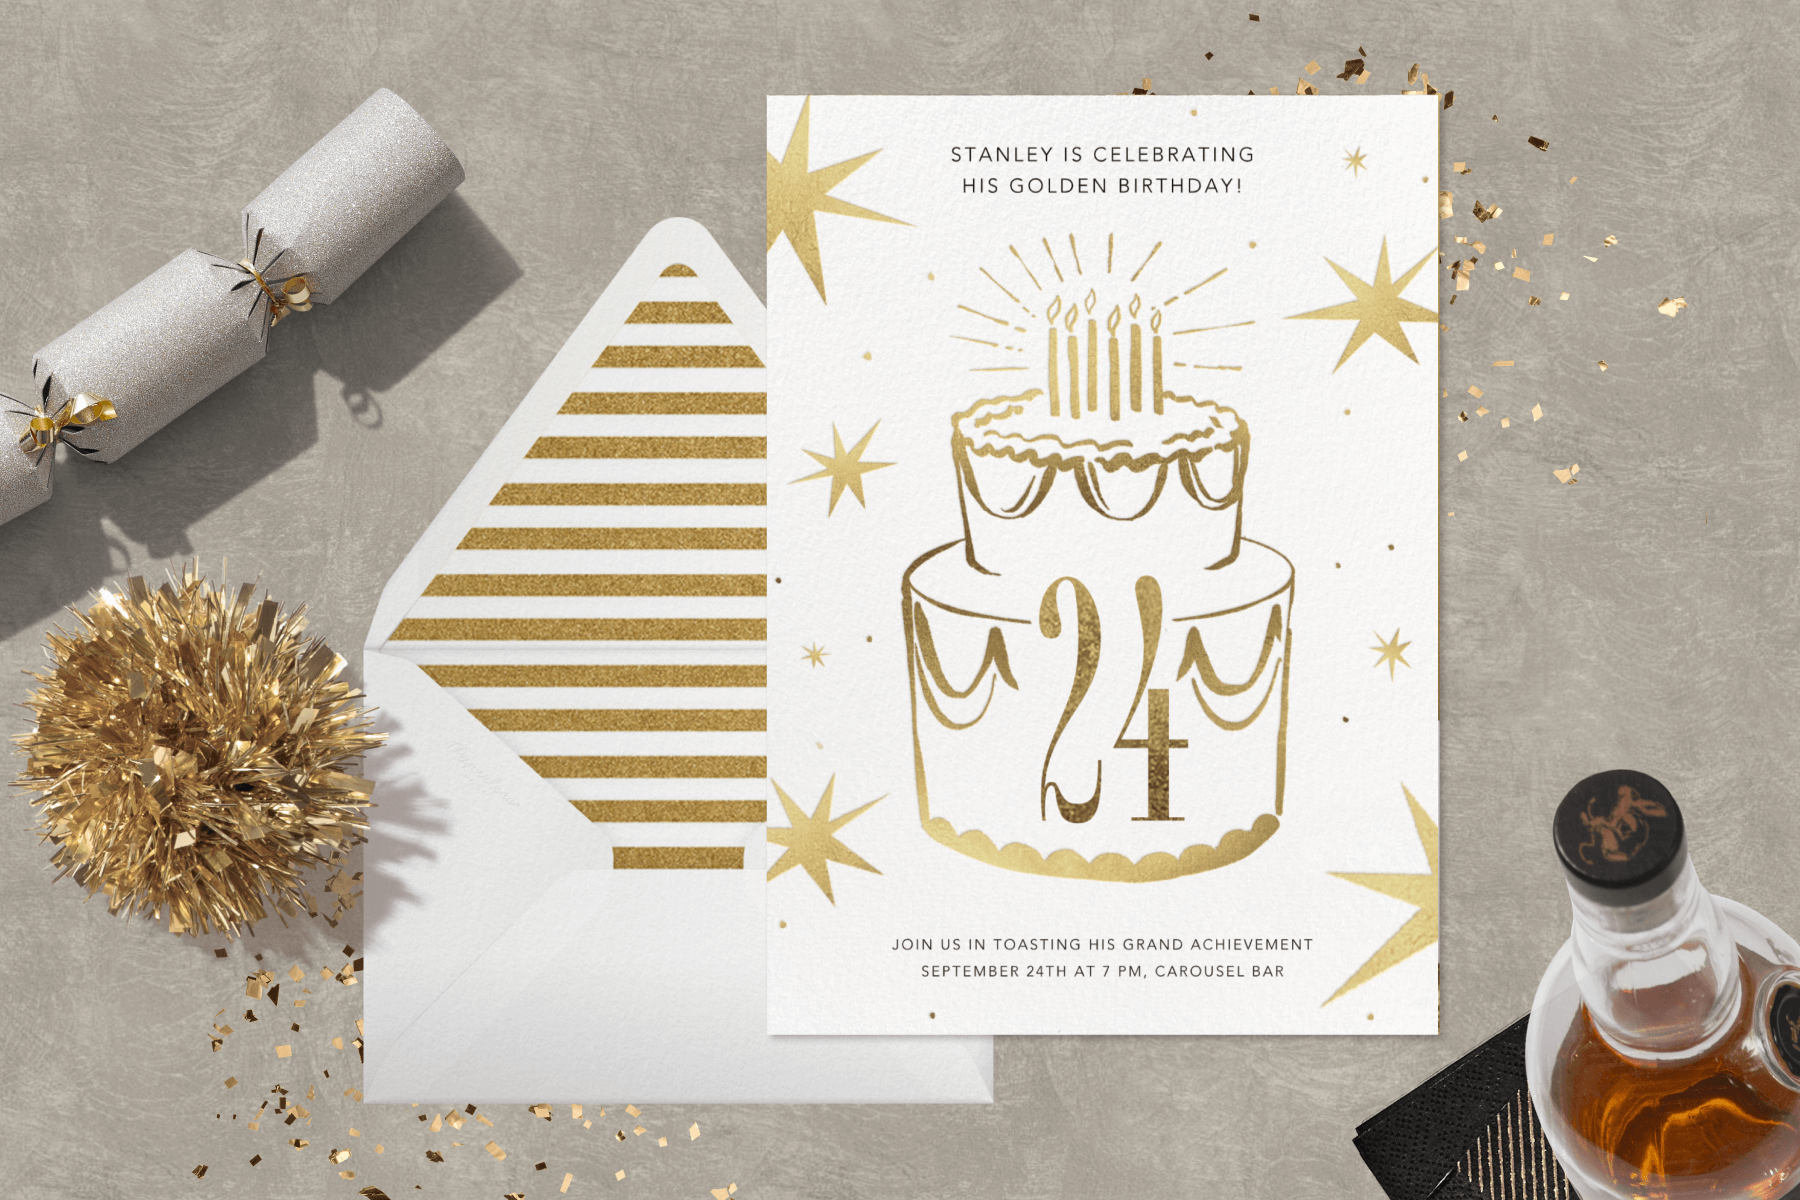 An invitation has a gold layer cake with ‘24’ on it surrounded by a party cracker, glitter, and a bottle.